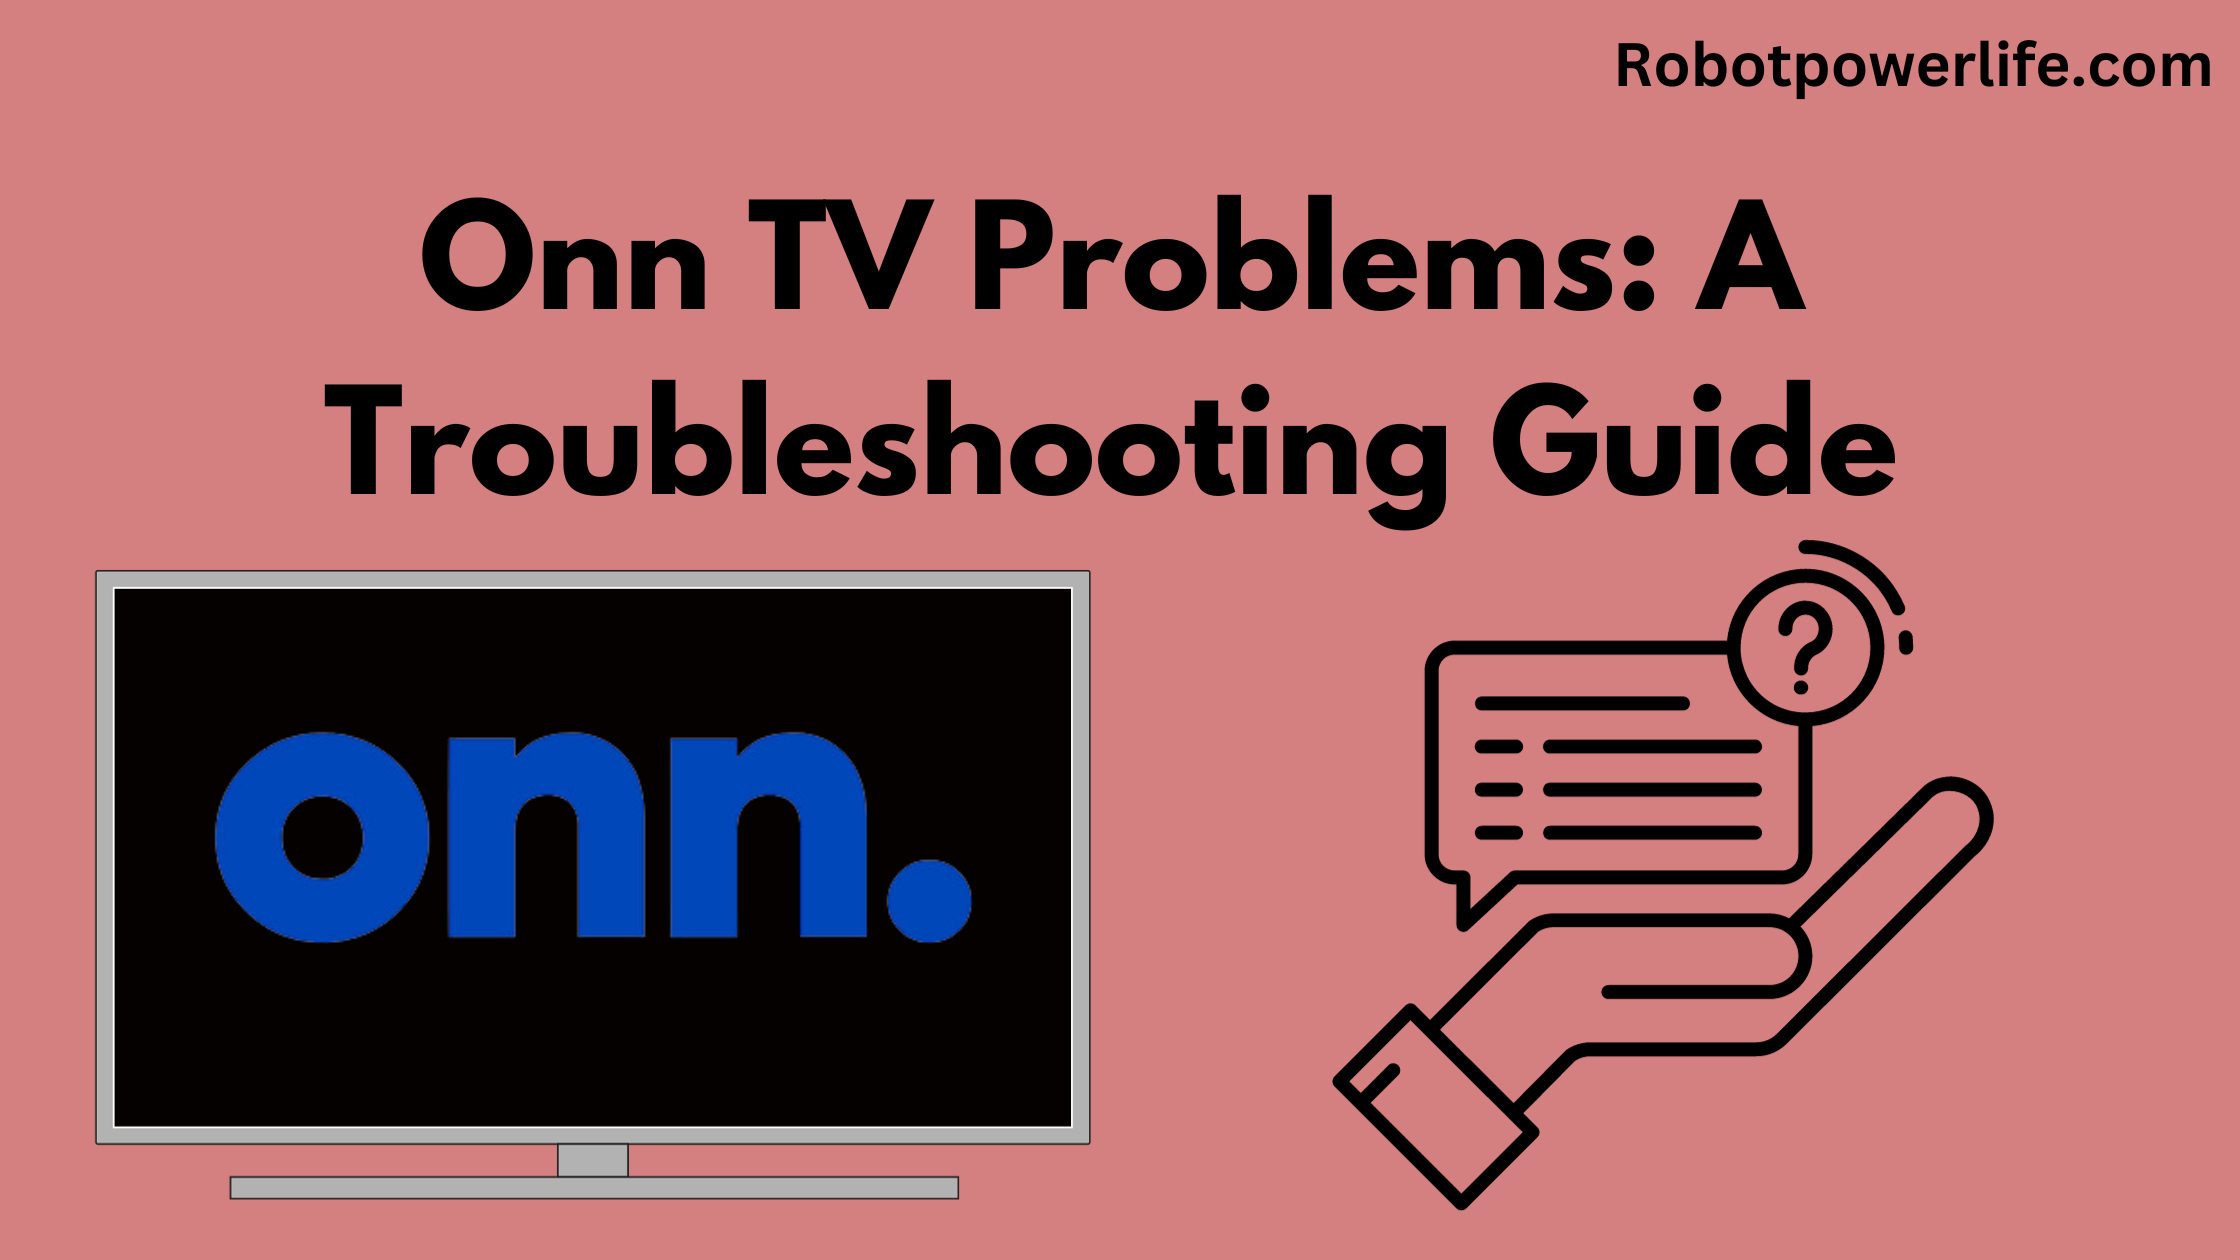 Onn TV Problems A Troubleshooting Guide